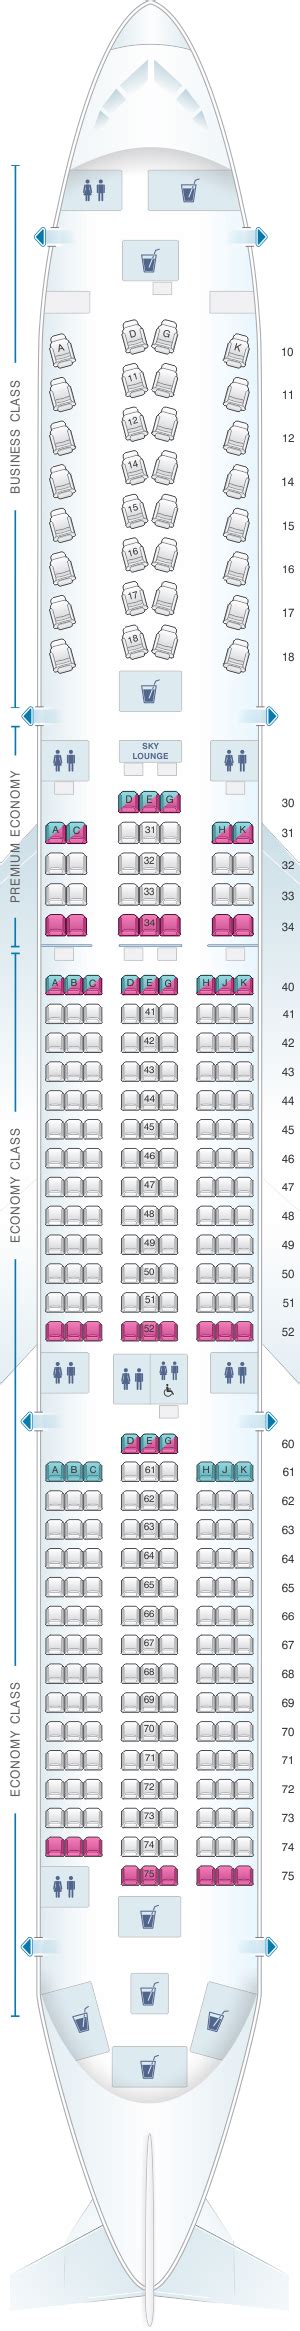 Seat Map China Airlines Airbus A350 900 Seatmaestro